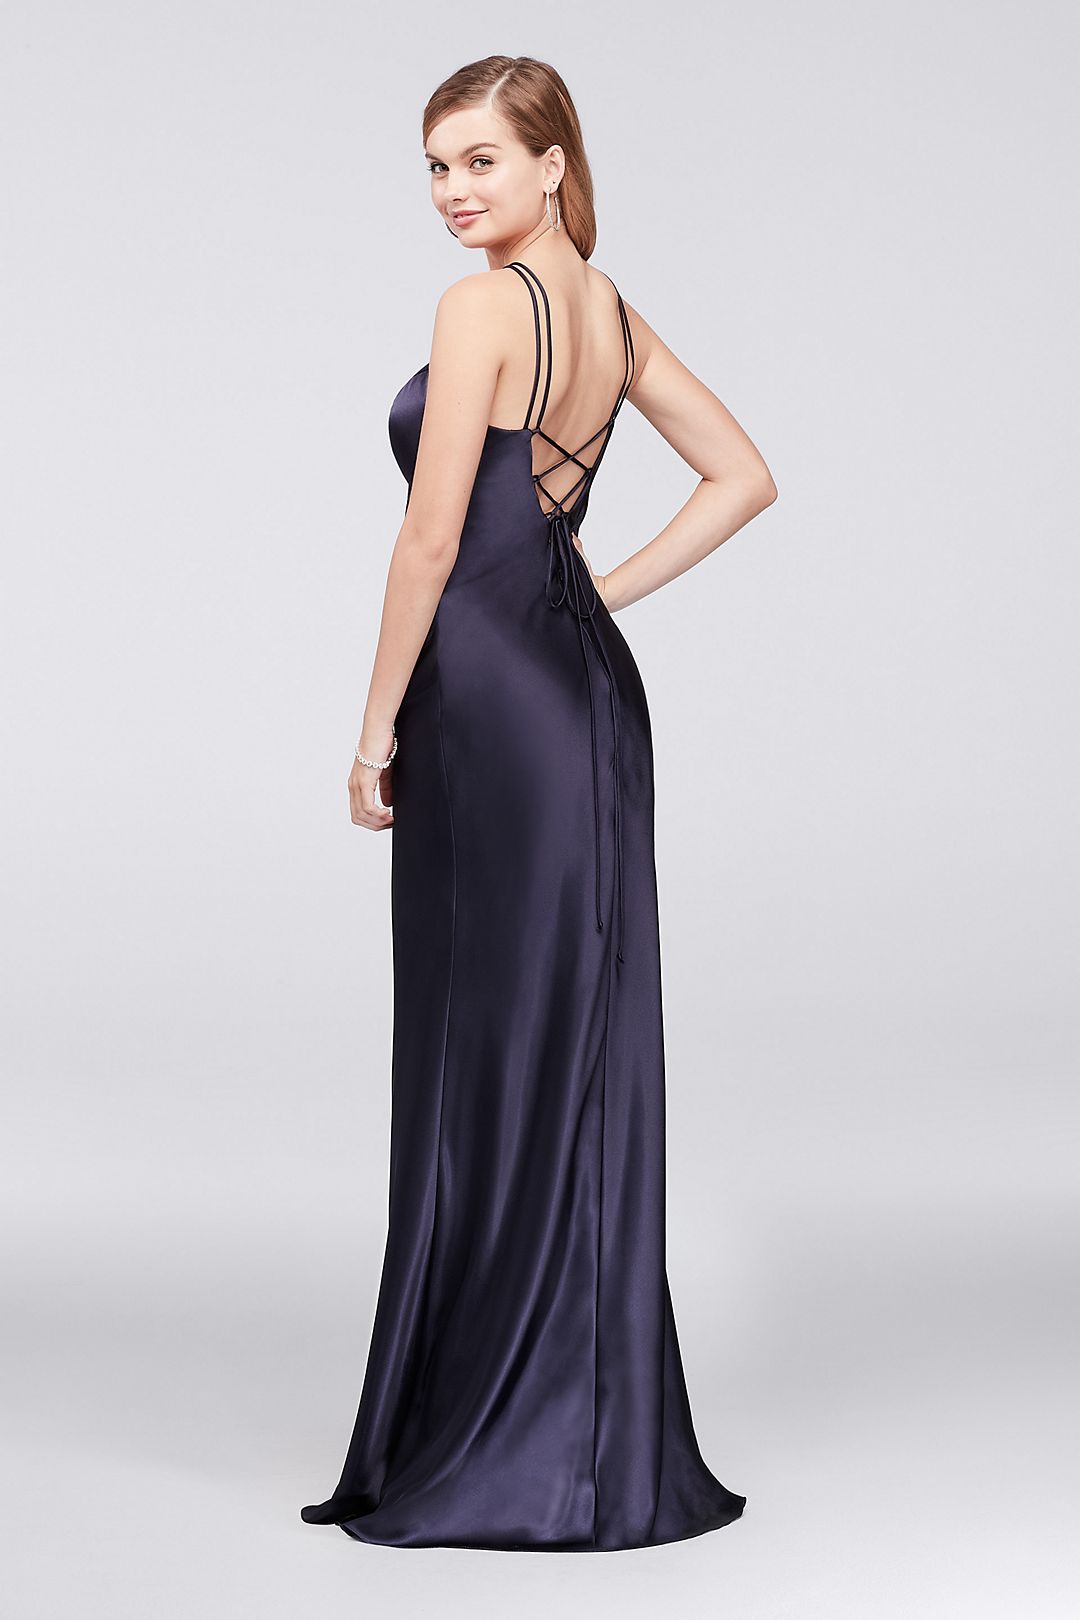 Charmeuse Halter Sheath Gown with Lace-Up Back Image 4